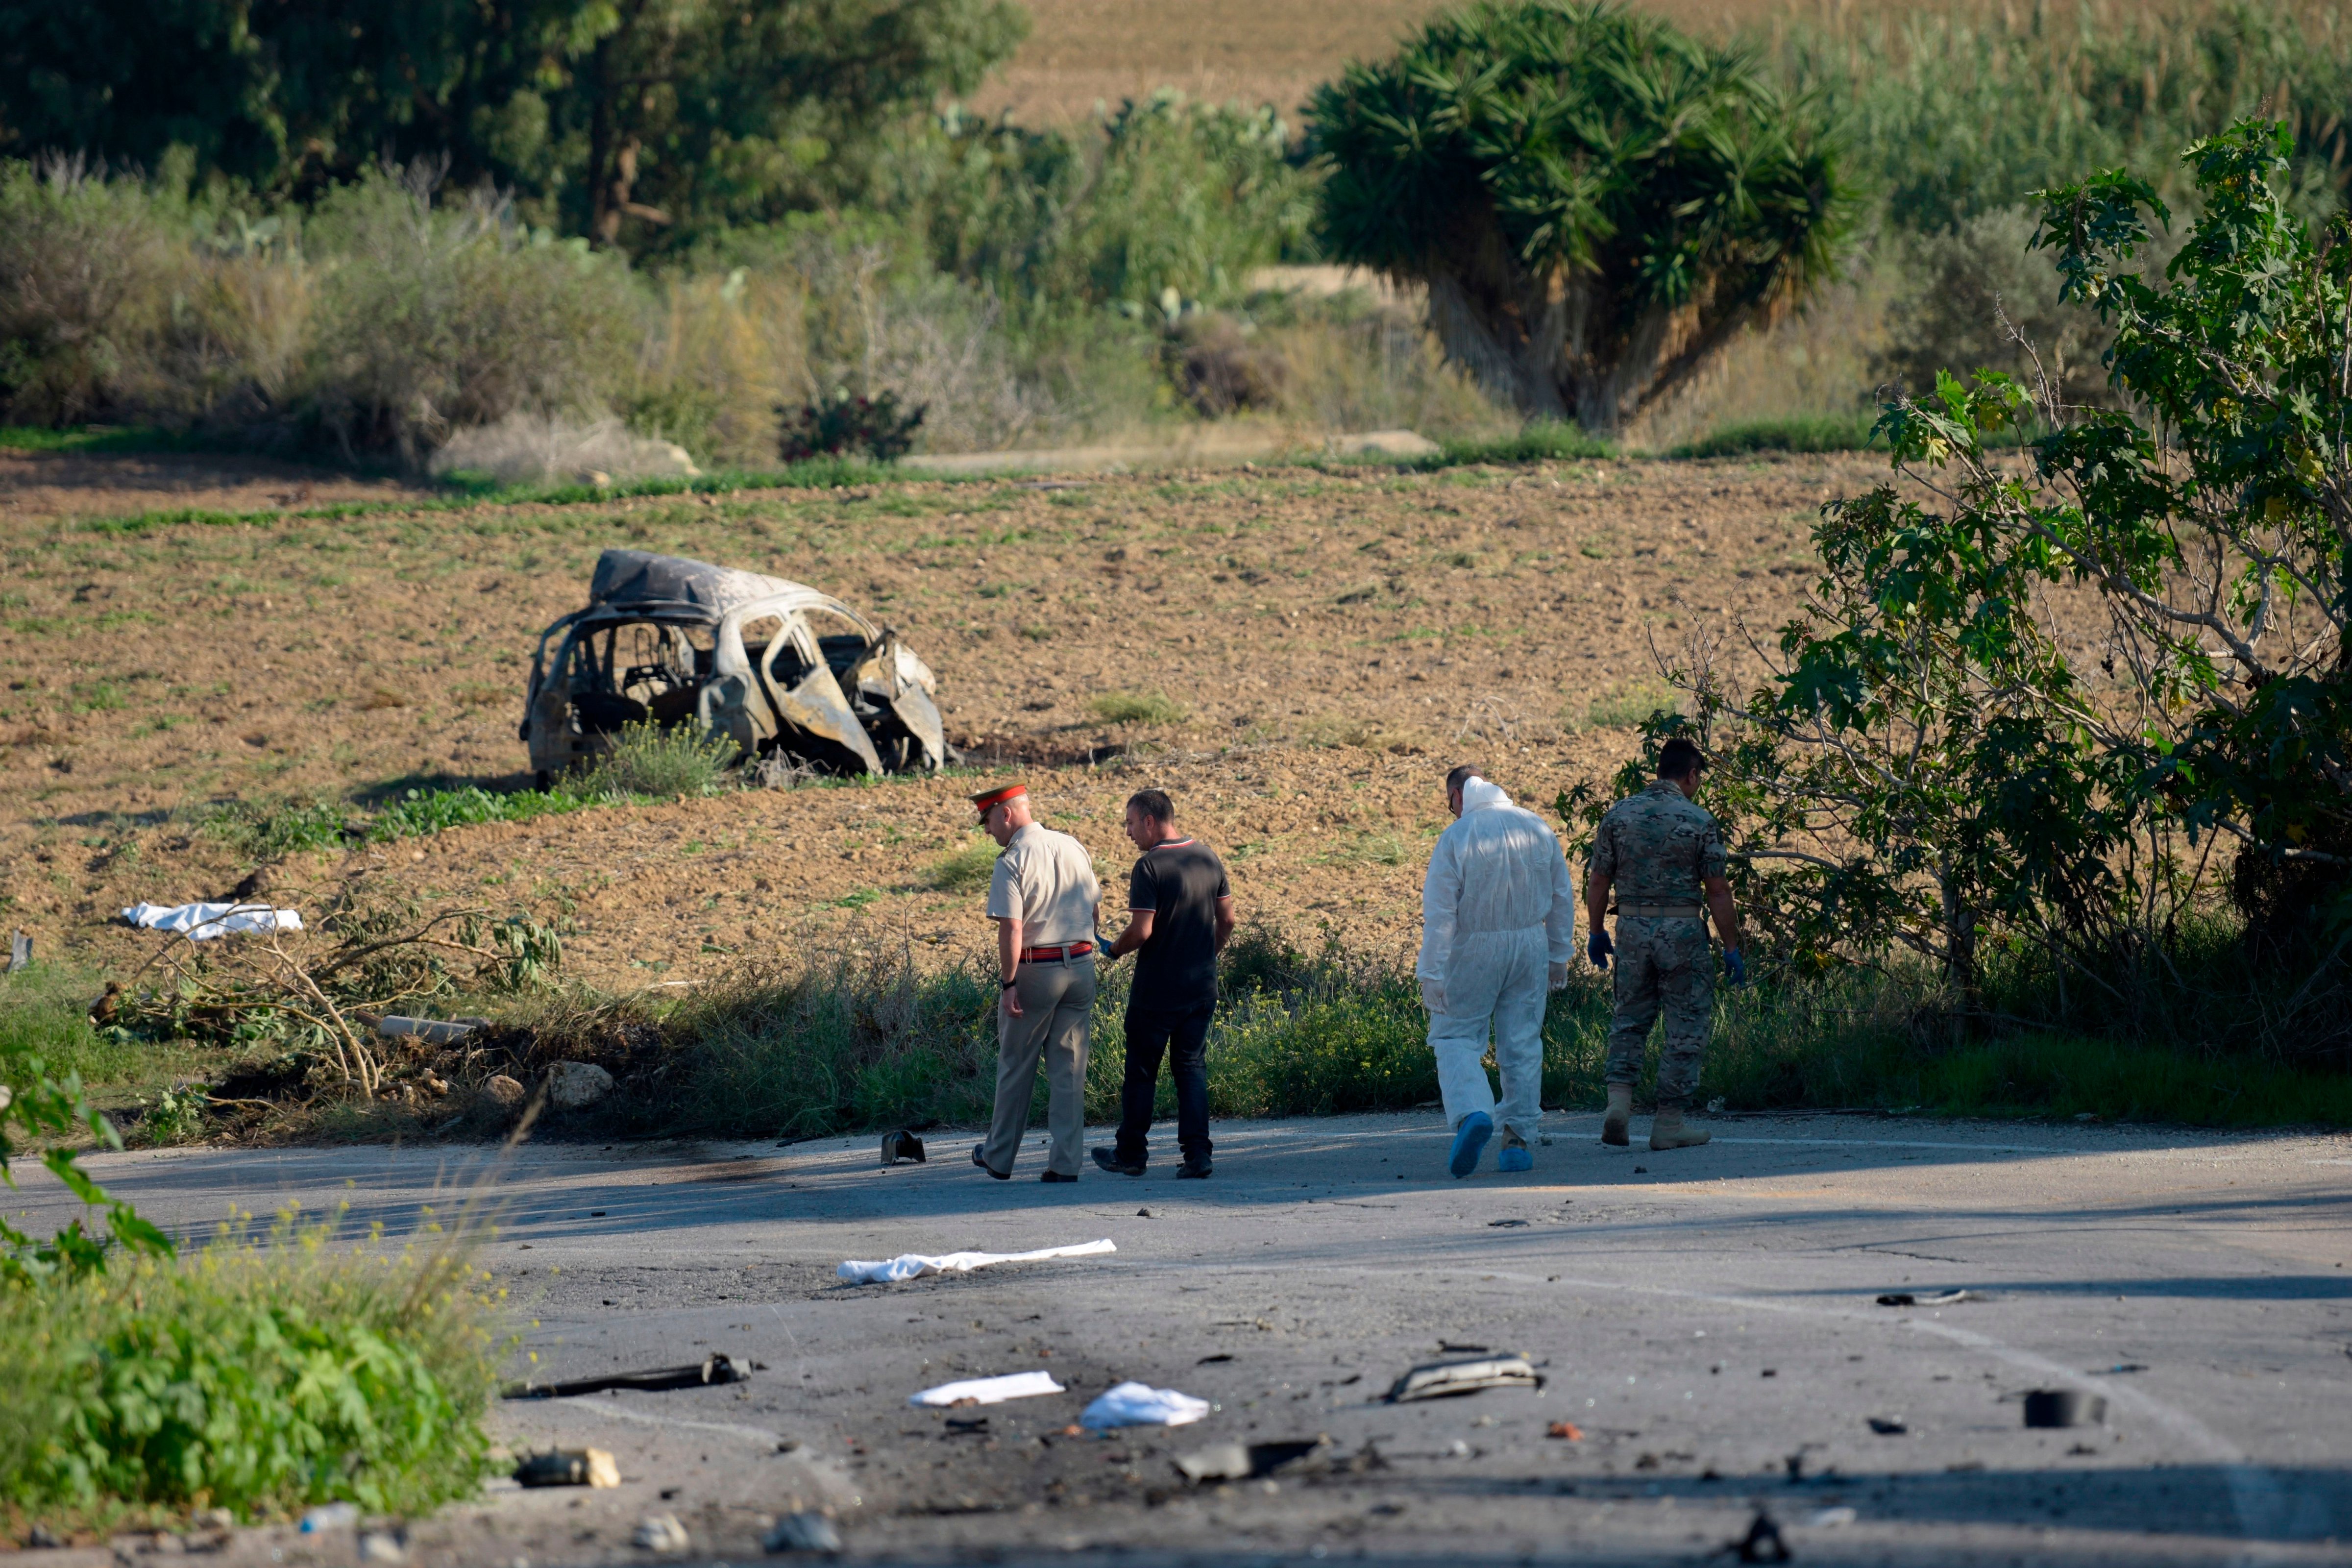 Police and forensic experts inspect the wreckage of a car bomb believed to have killed journalist and blogger Daphne Caruana Galizia close to her home in Bidnija, Malta, on October 16, 2017. (AFP/Getty Images)